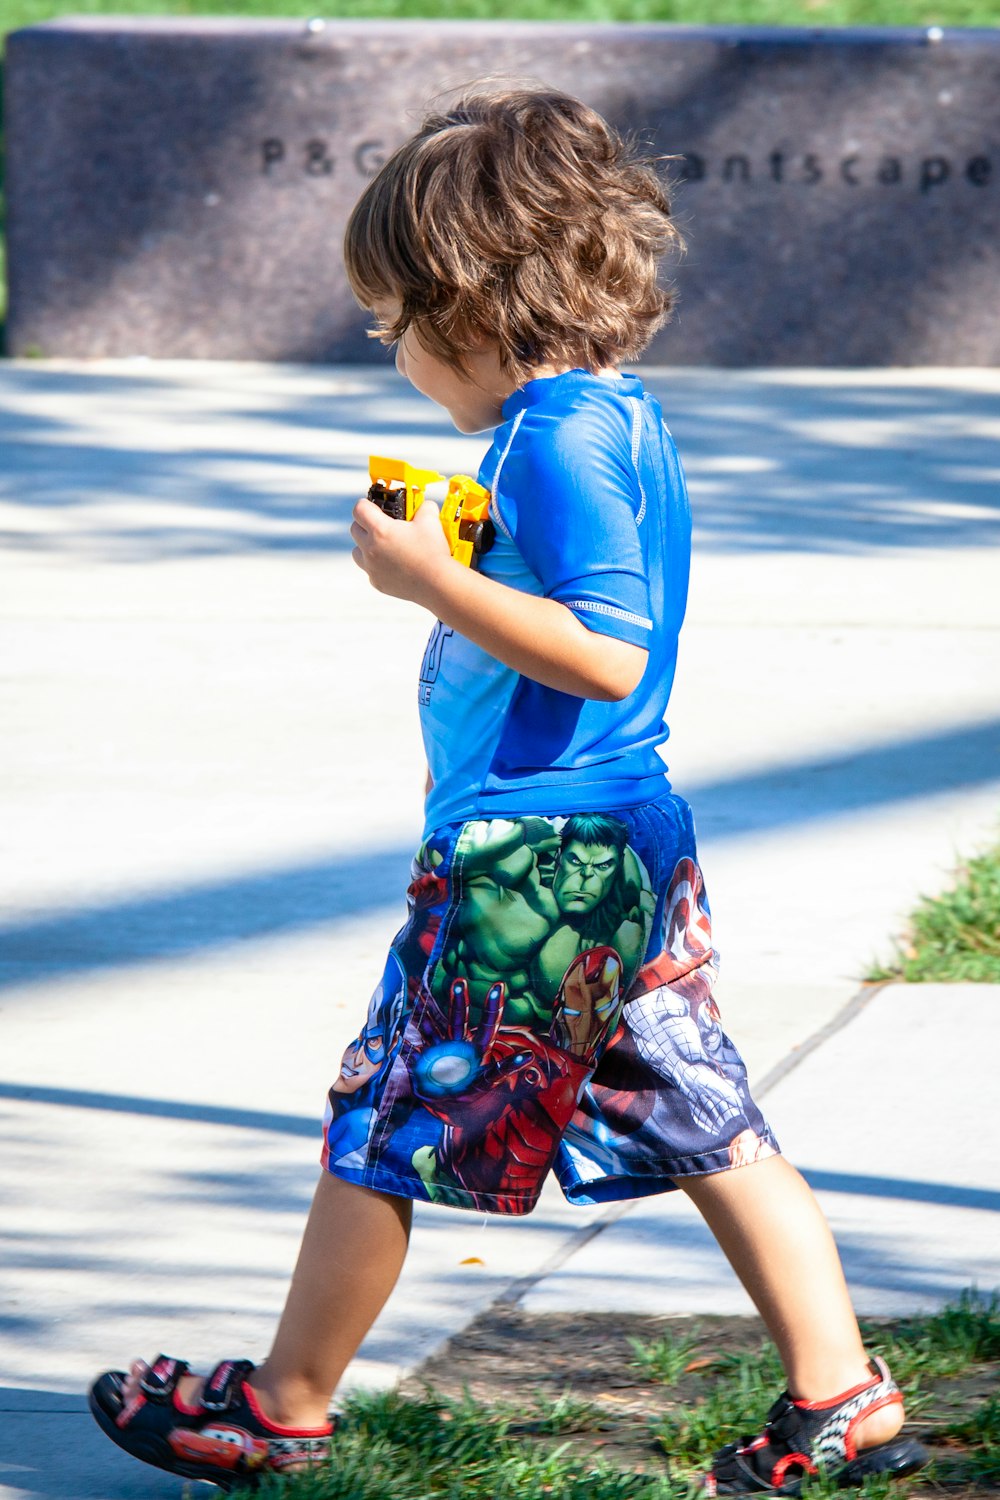 girl in blue t-shirt and green and red shorts holding yellow toy gun